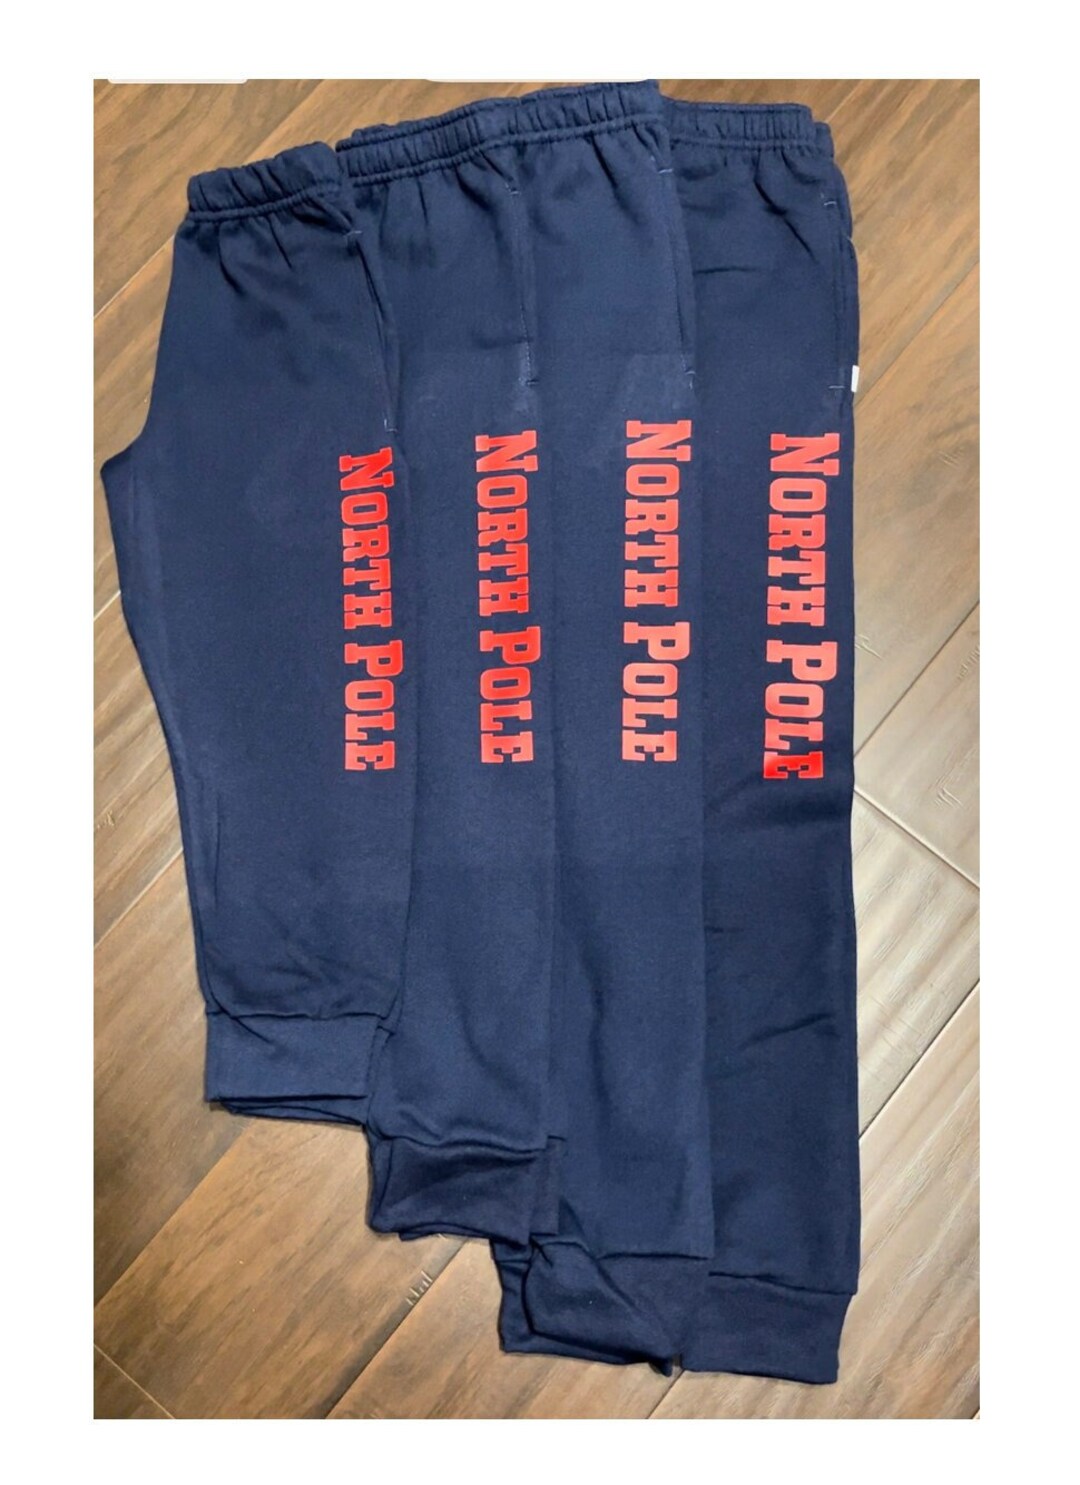 Custom Group Team Sweatpants With Pockets, Personalize Your Sweatpants ...